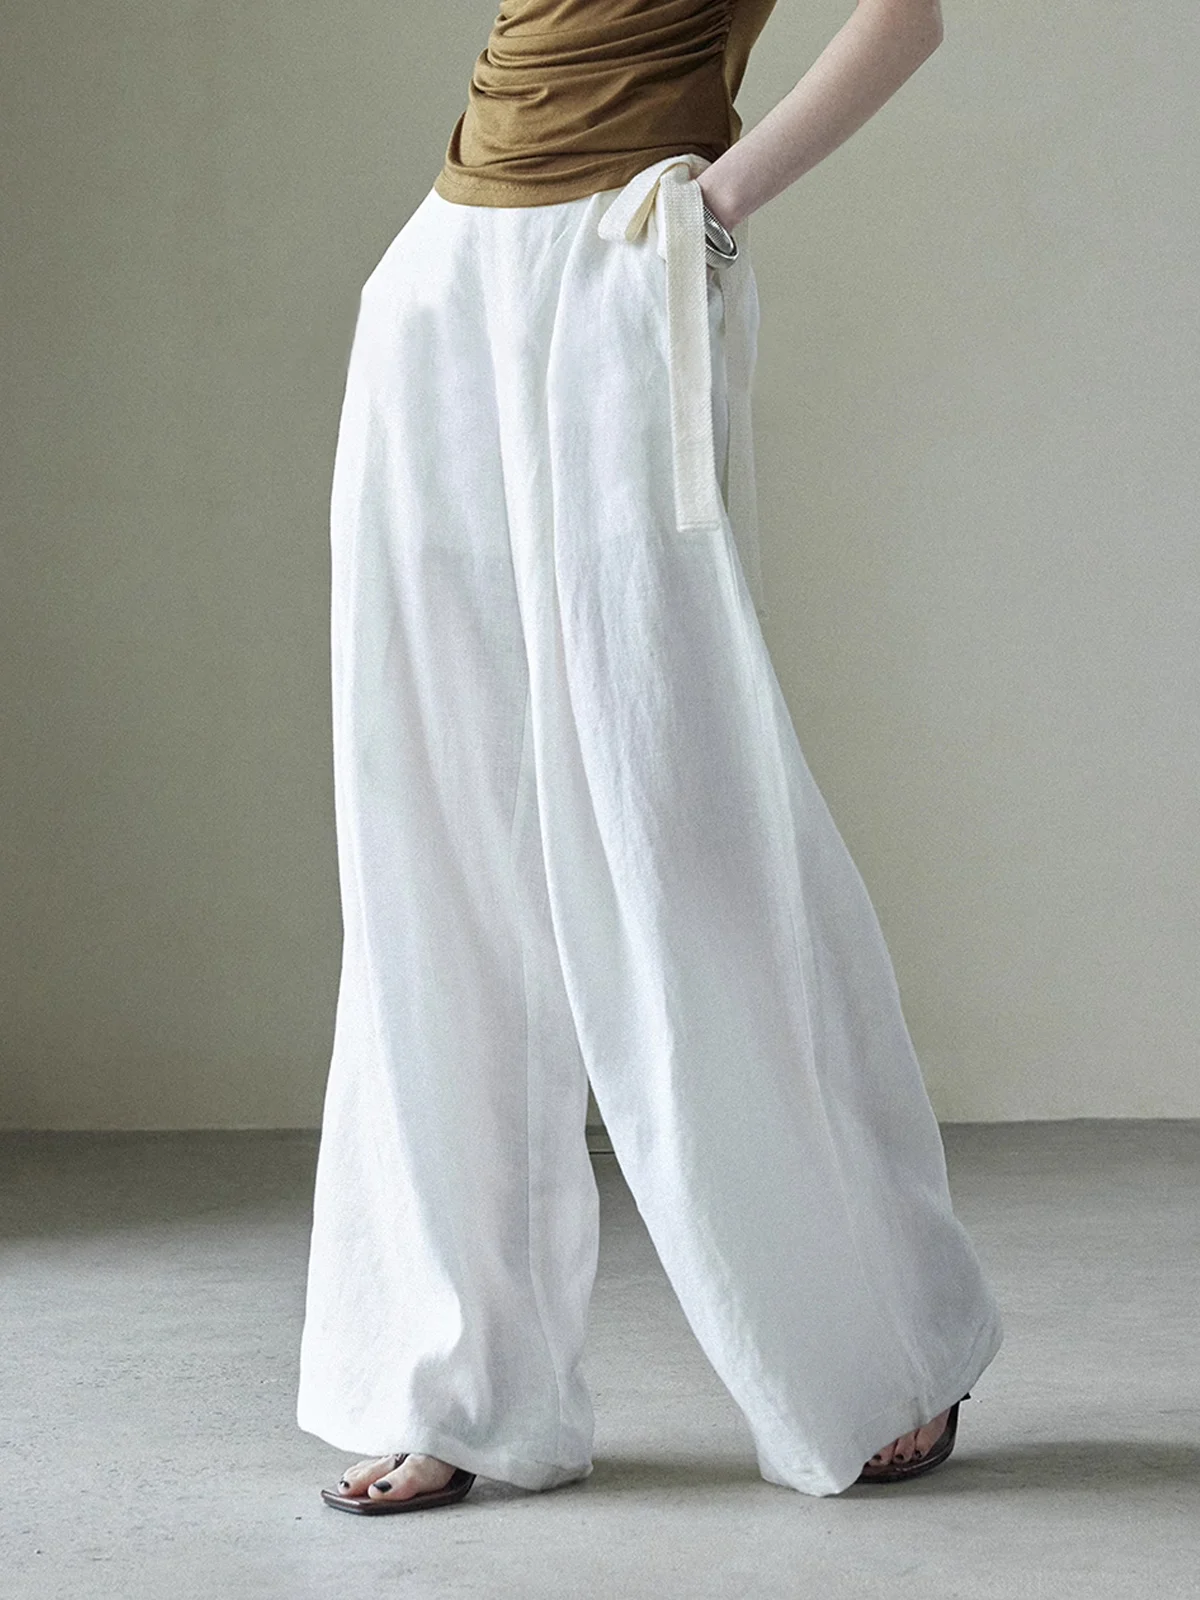 Daily Regular Fit Bow Casual Fashion Pants